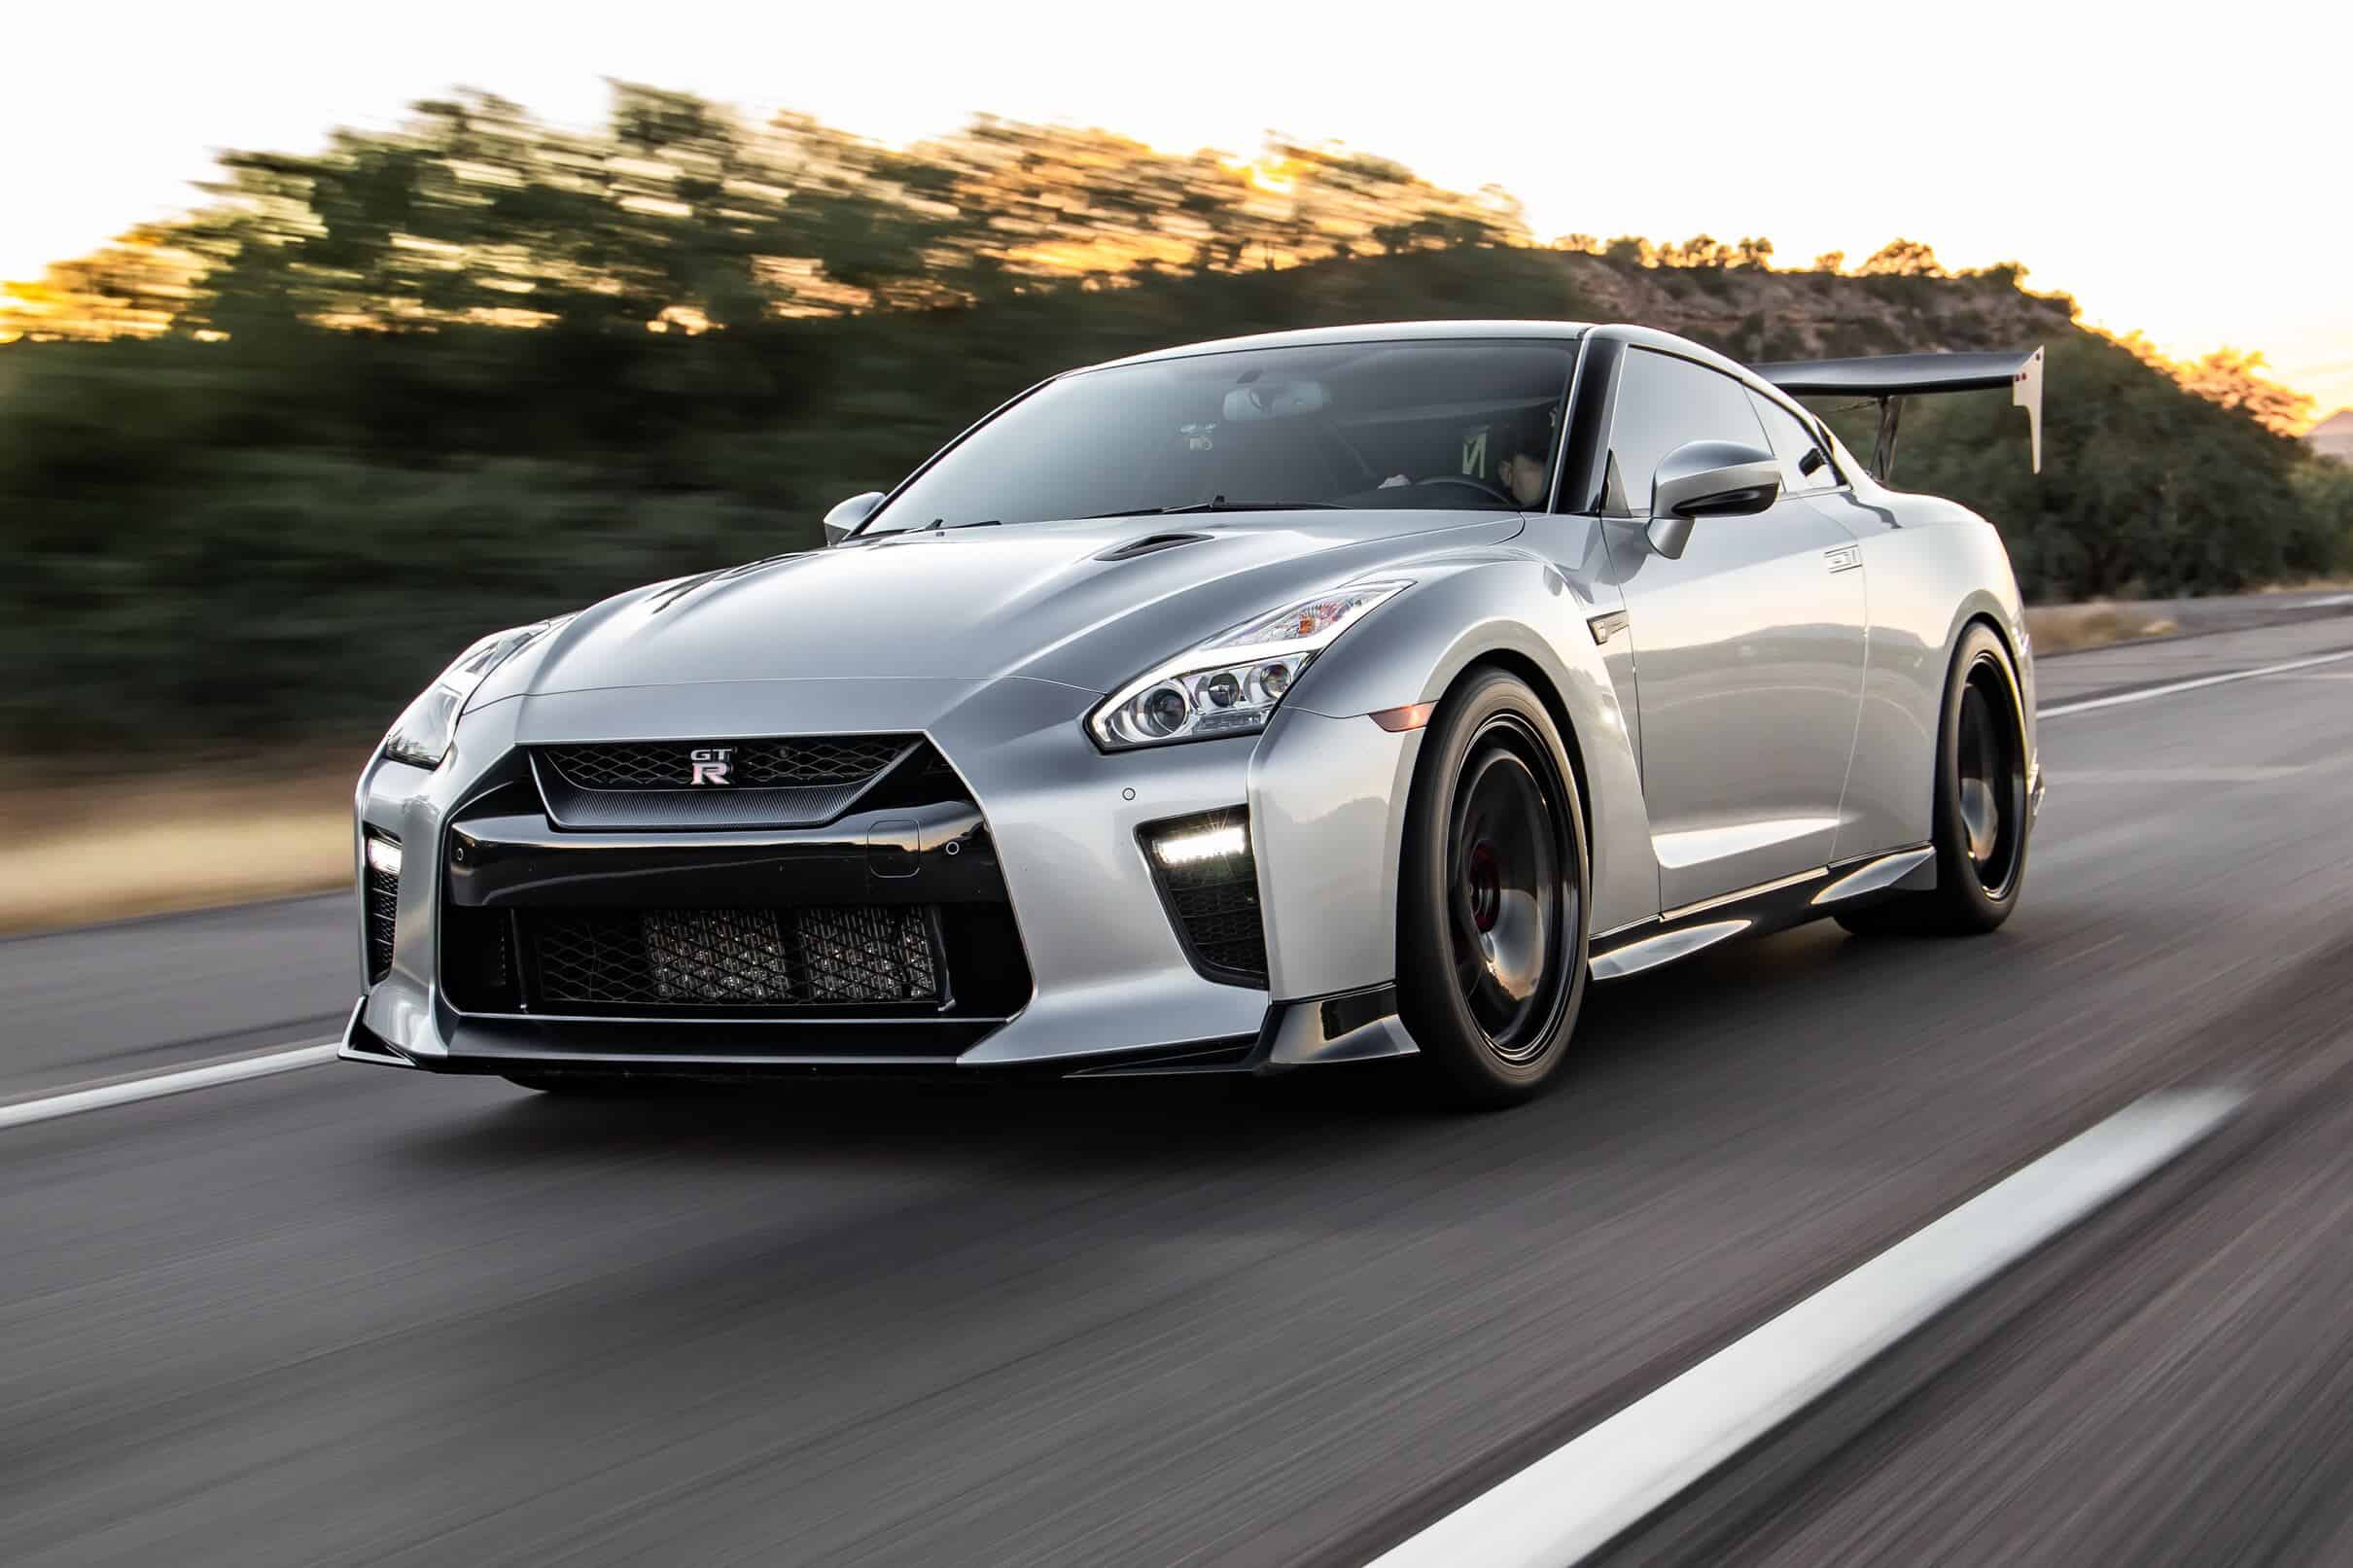 Silver Nissan GT-R Supercar - A Symbol of Speed and Elegance